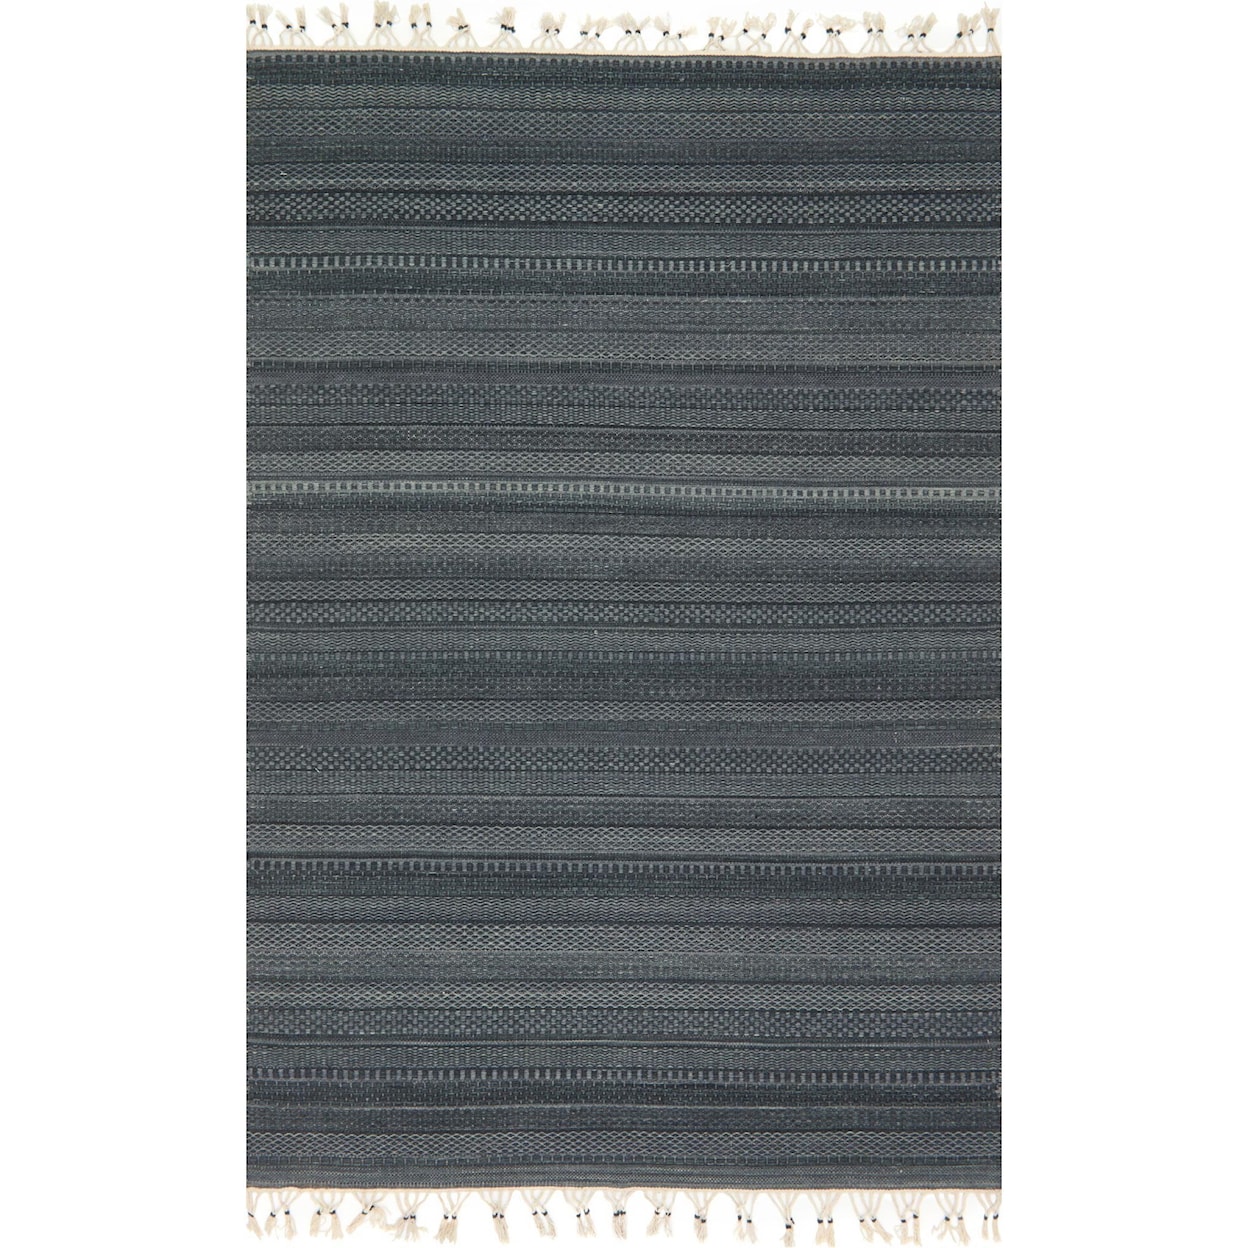 Magnolia Home by Joanna Gaines for Loloi Mikey 3' 6" x 5' 6" Rectangle Rug